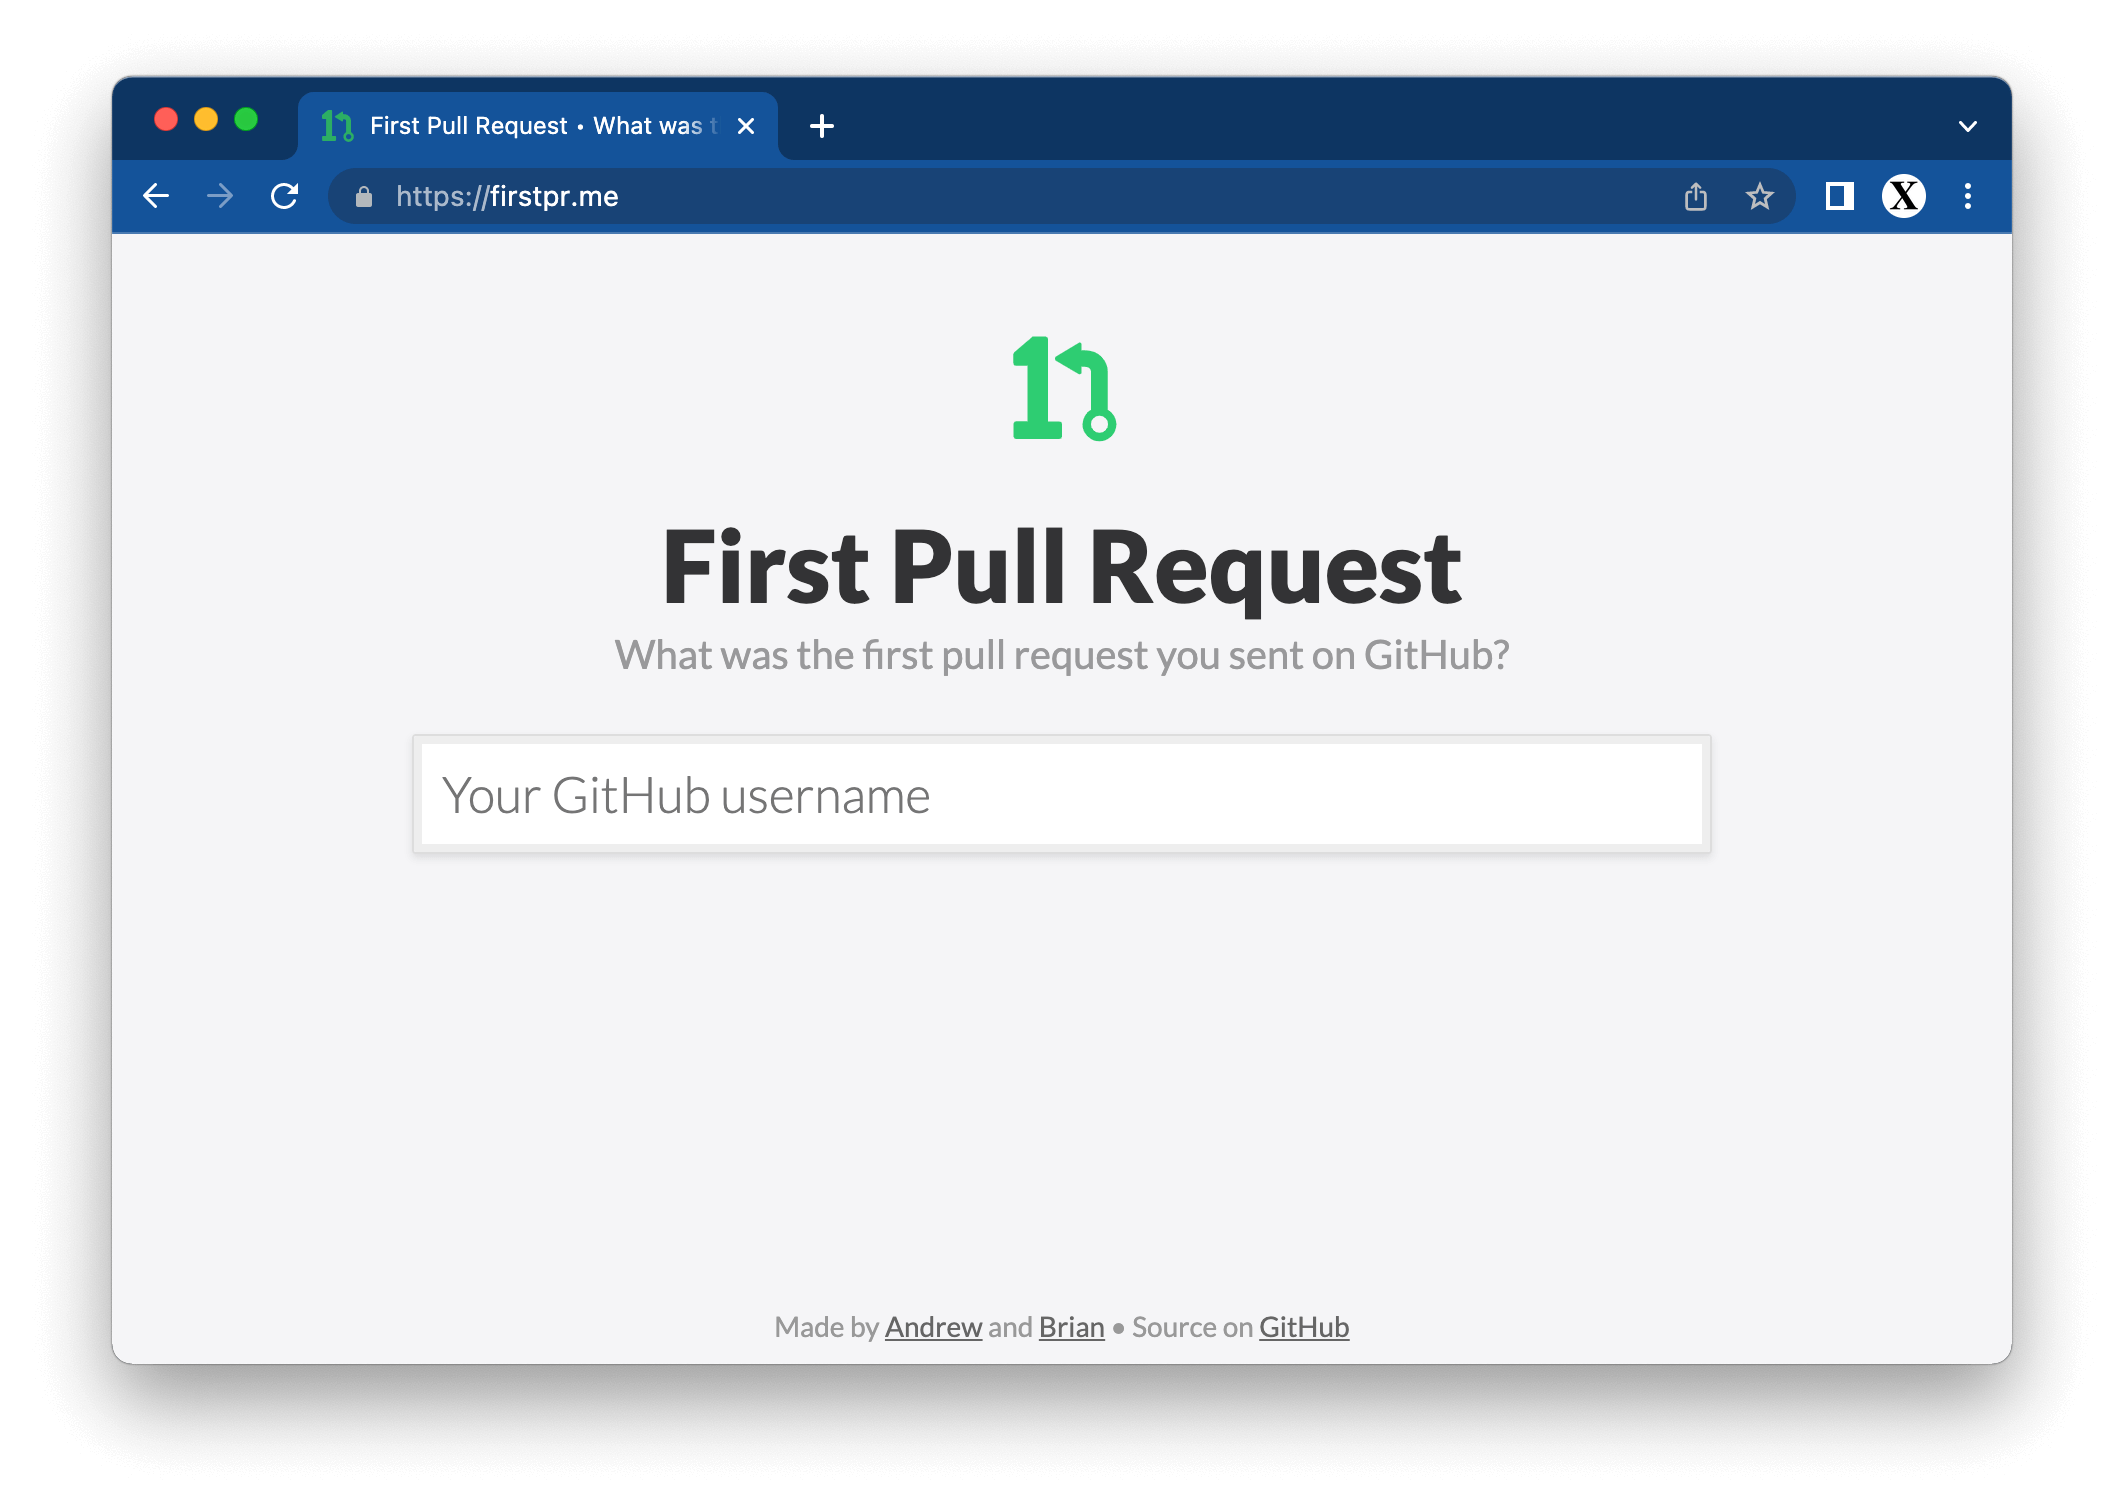 First Pull Request